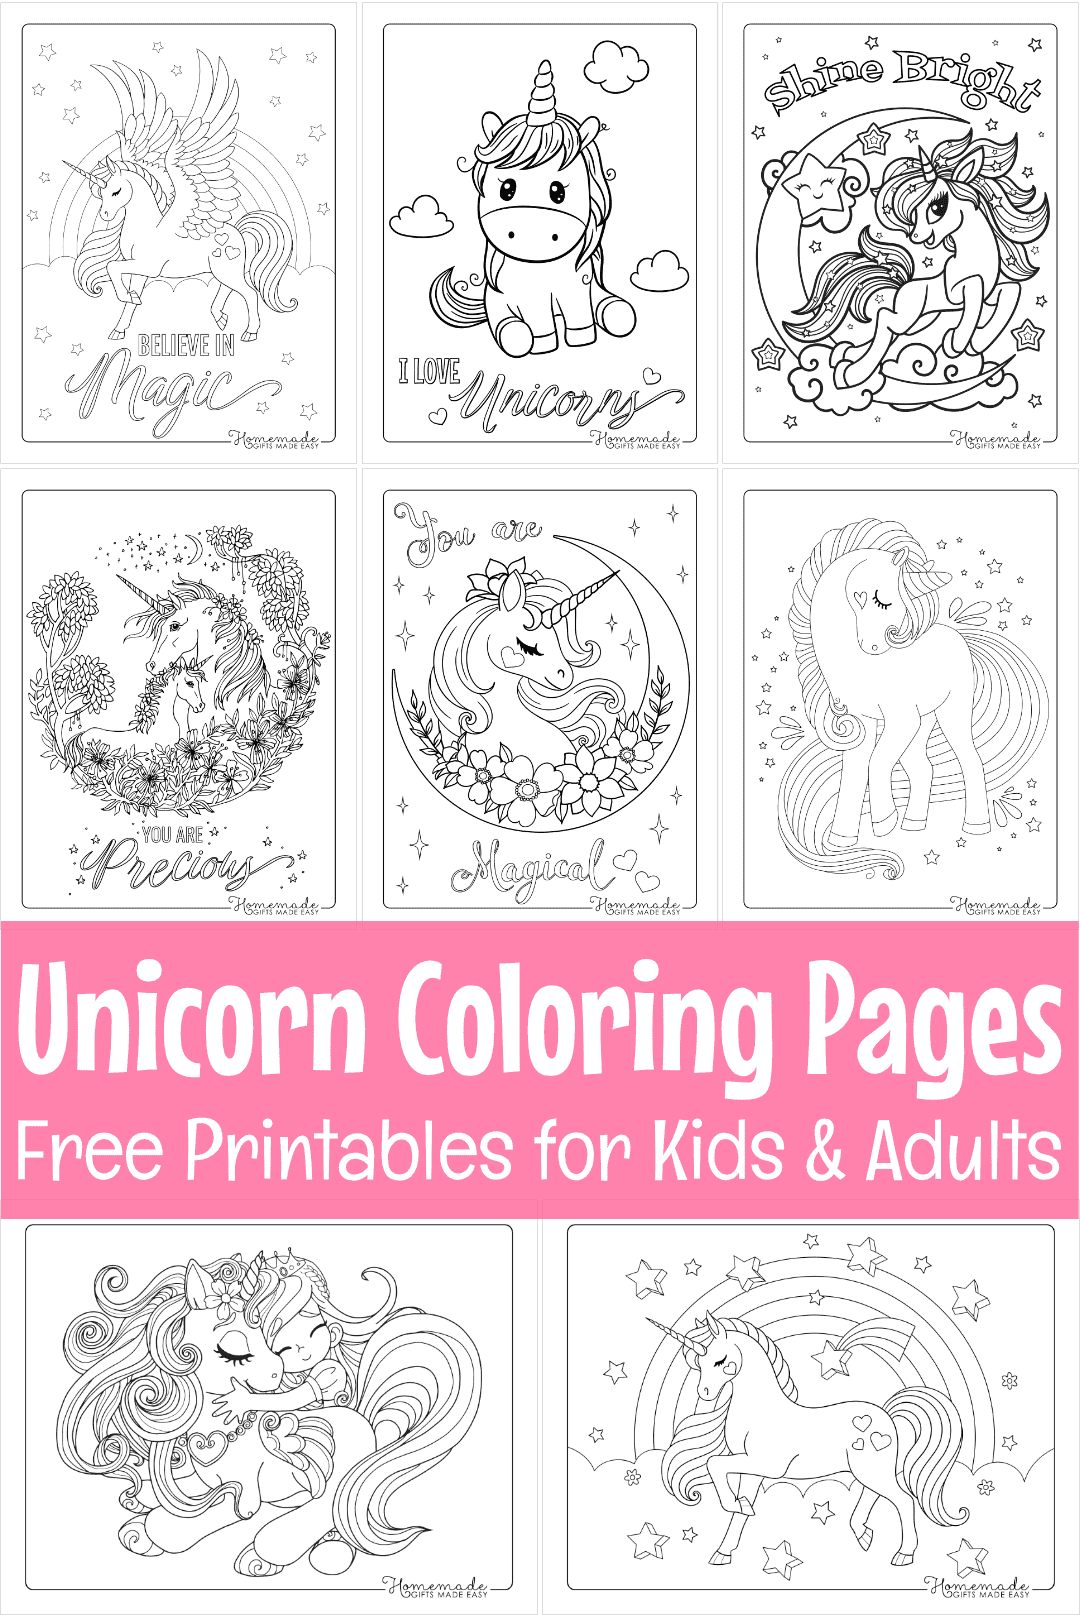 Magical Unicorn Coloring Pages for Kids & Adults   Free Printables